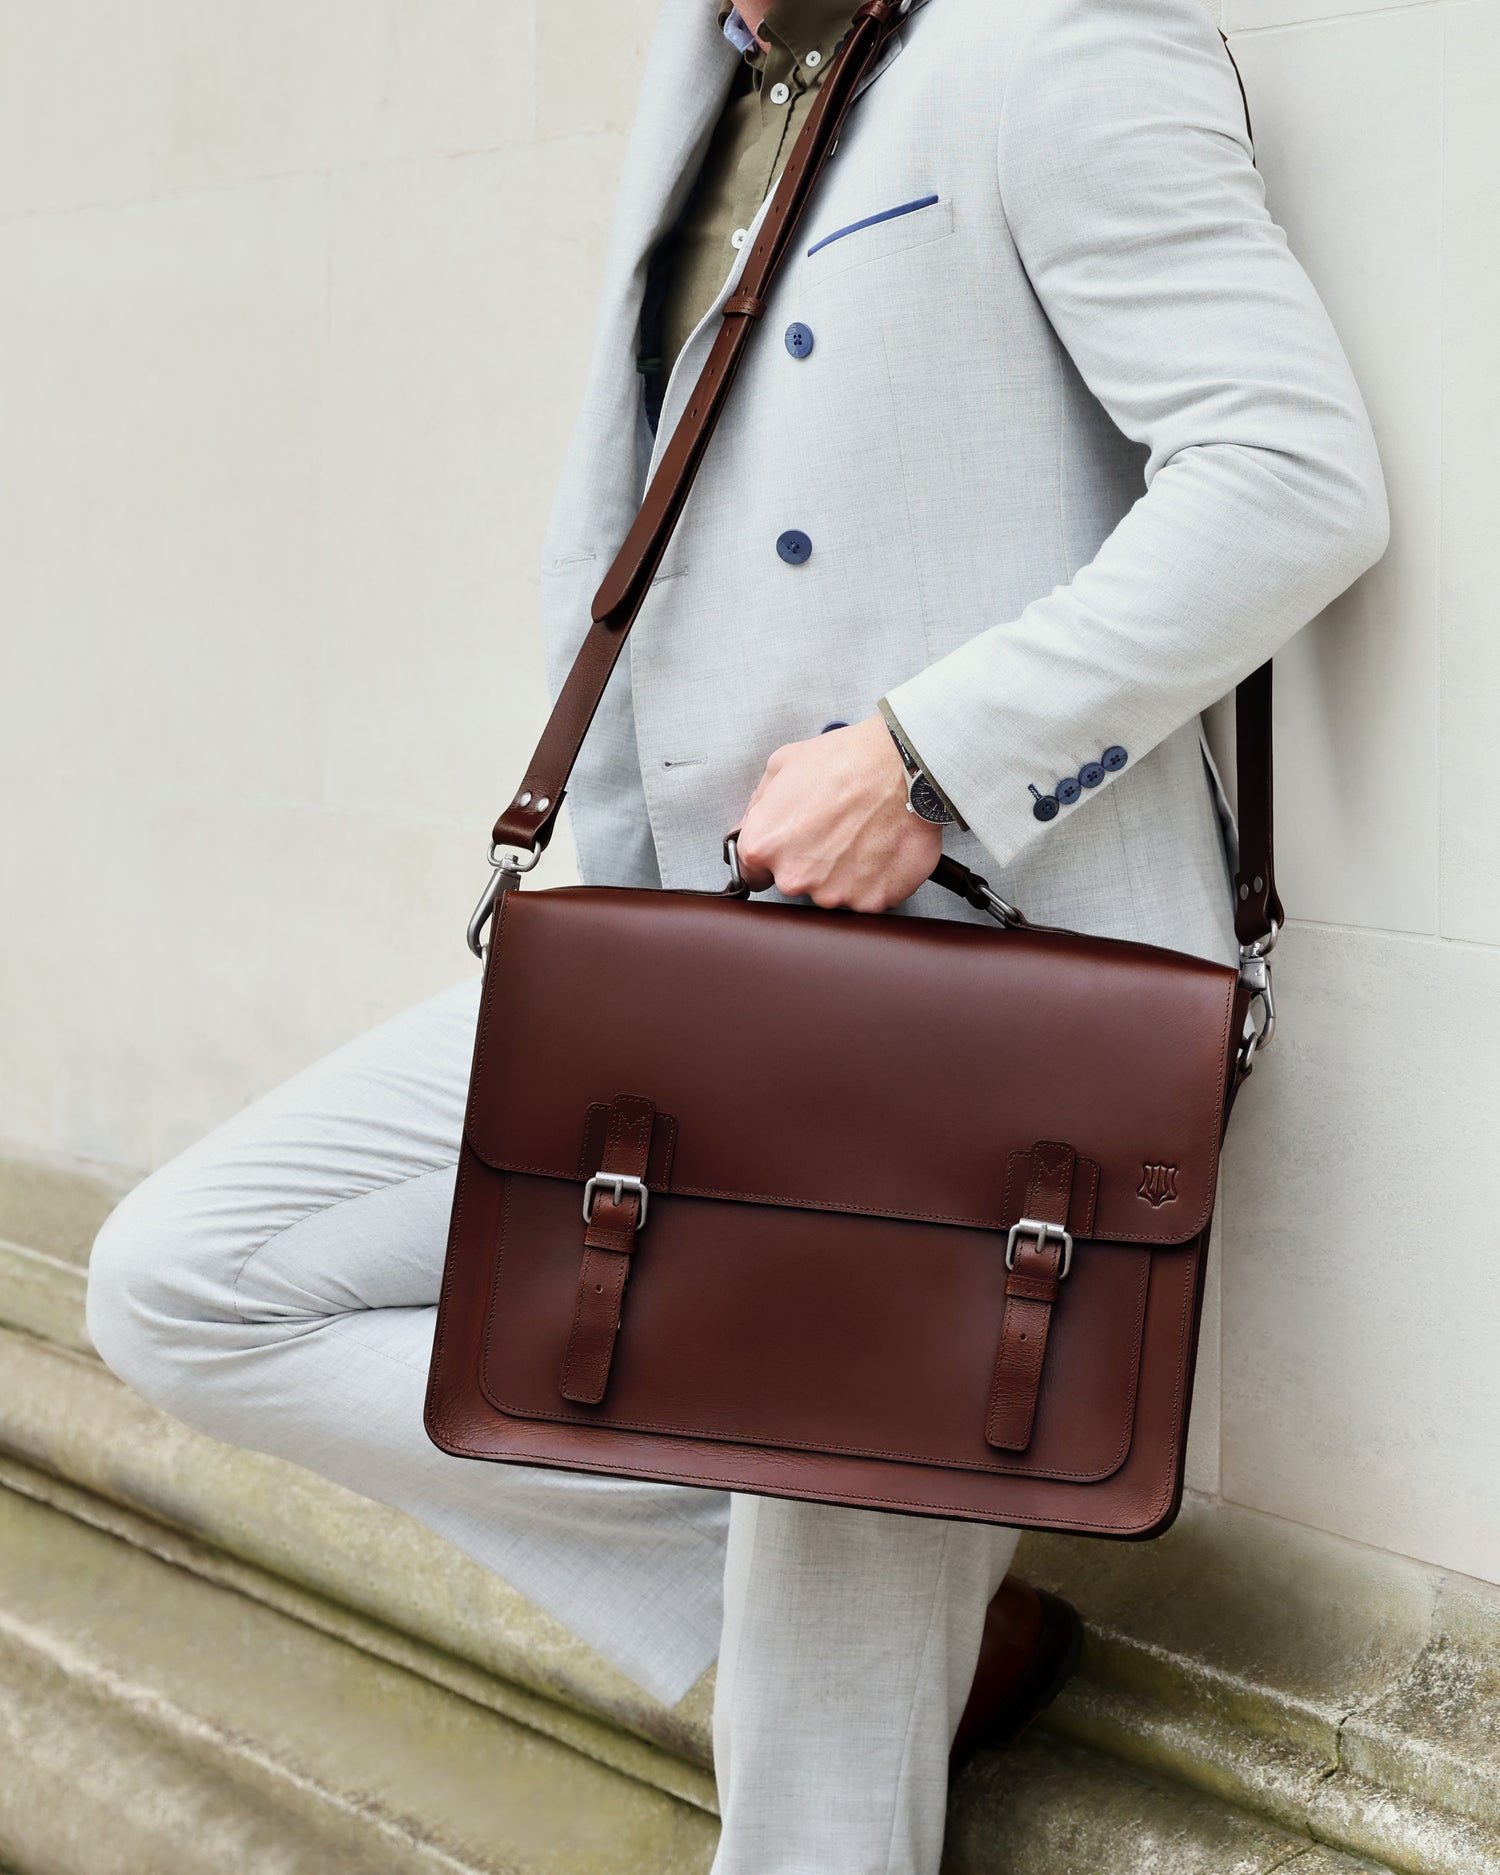 The Heritage Brown Leather Satchel Briefcase